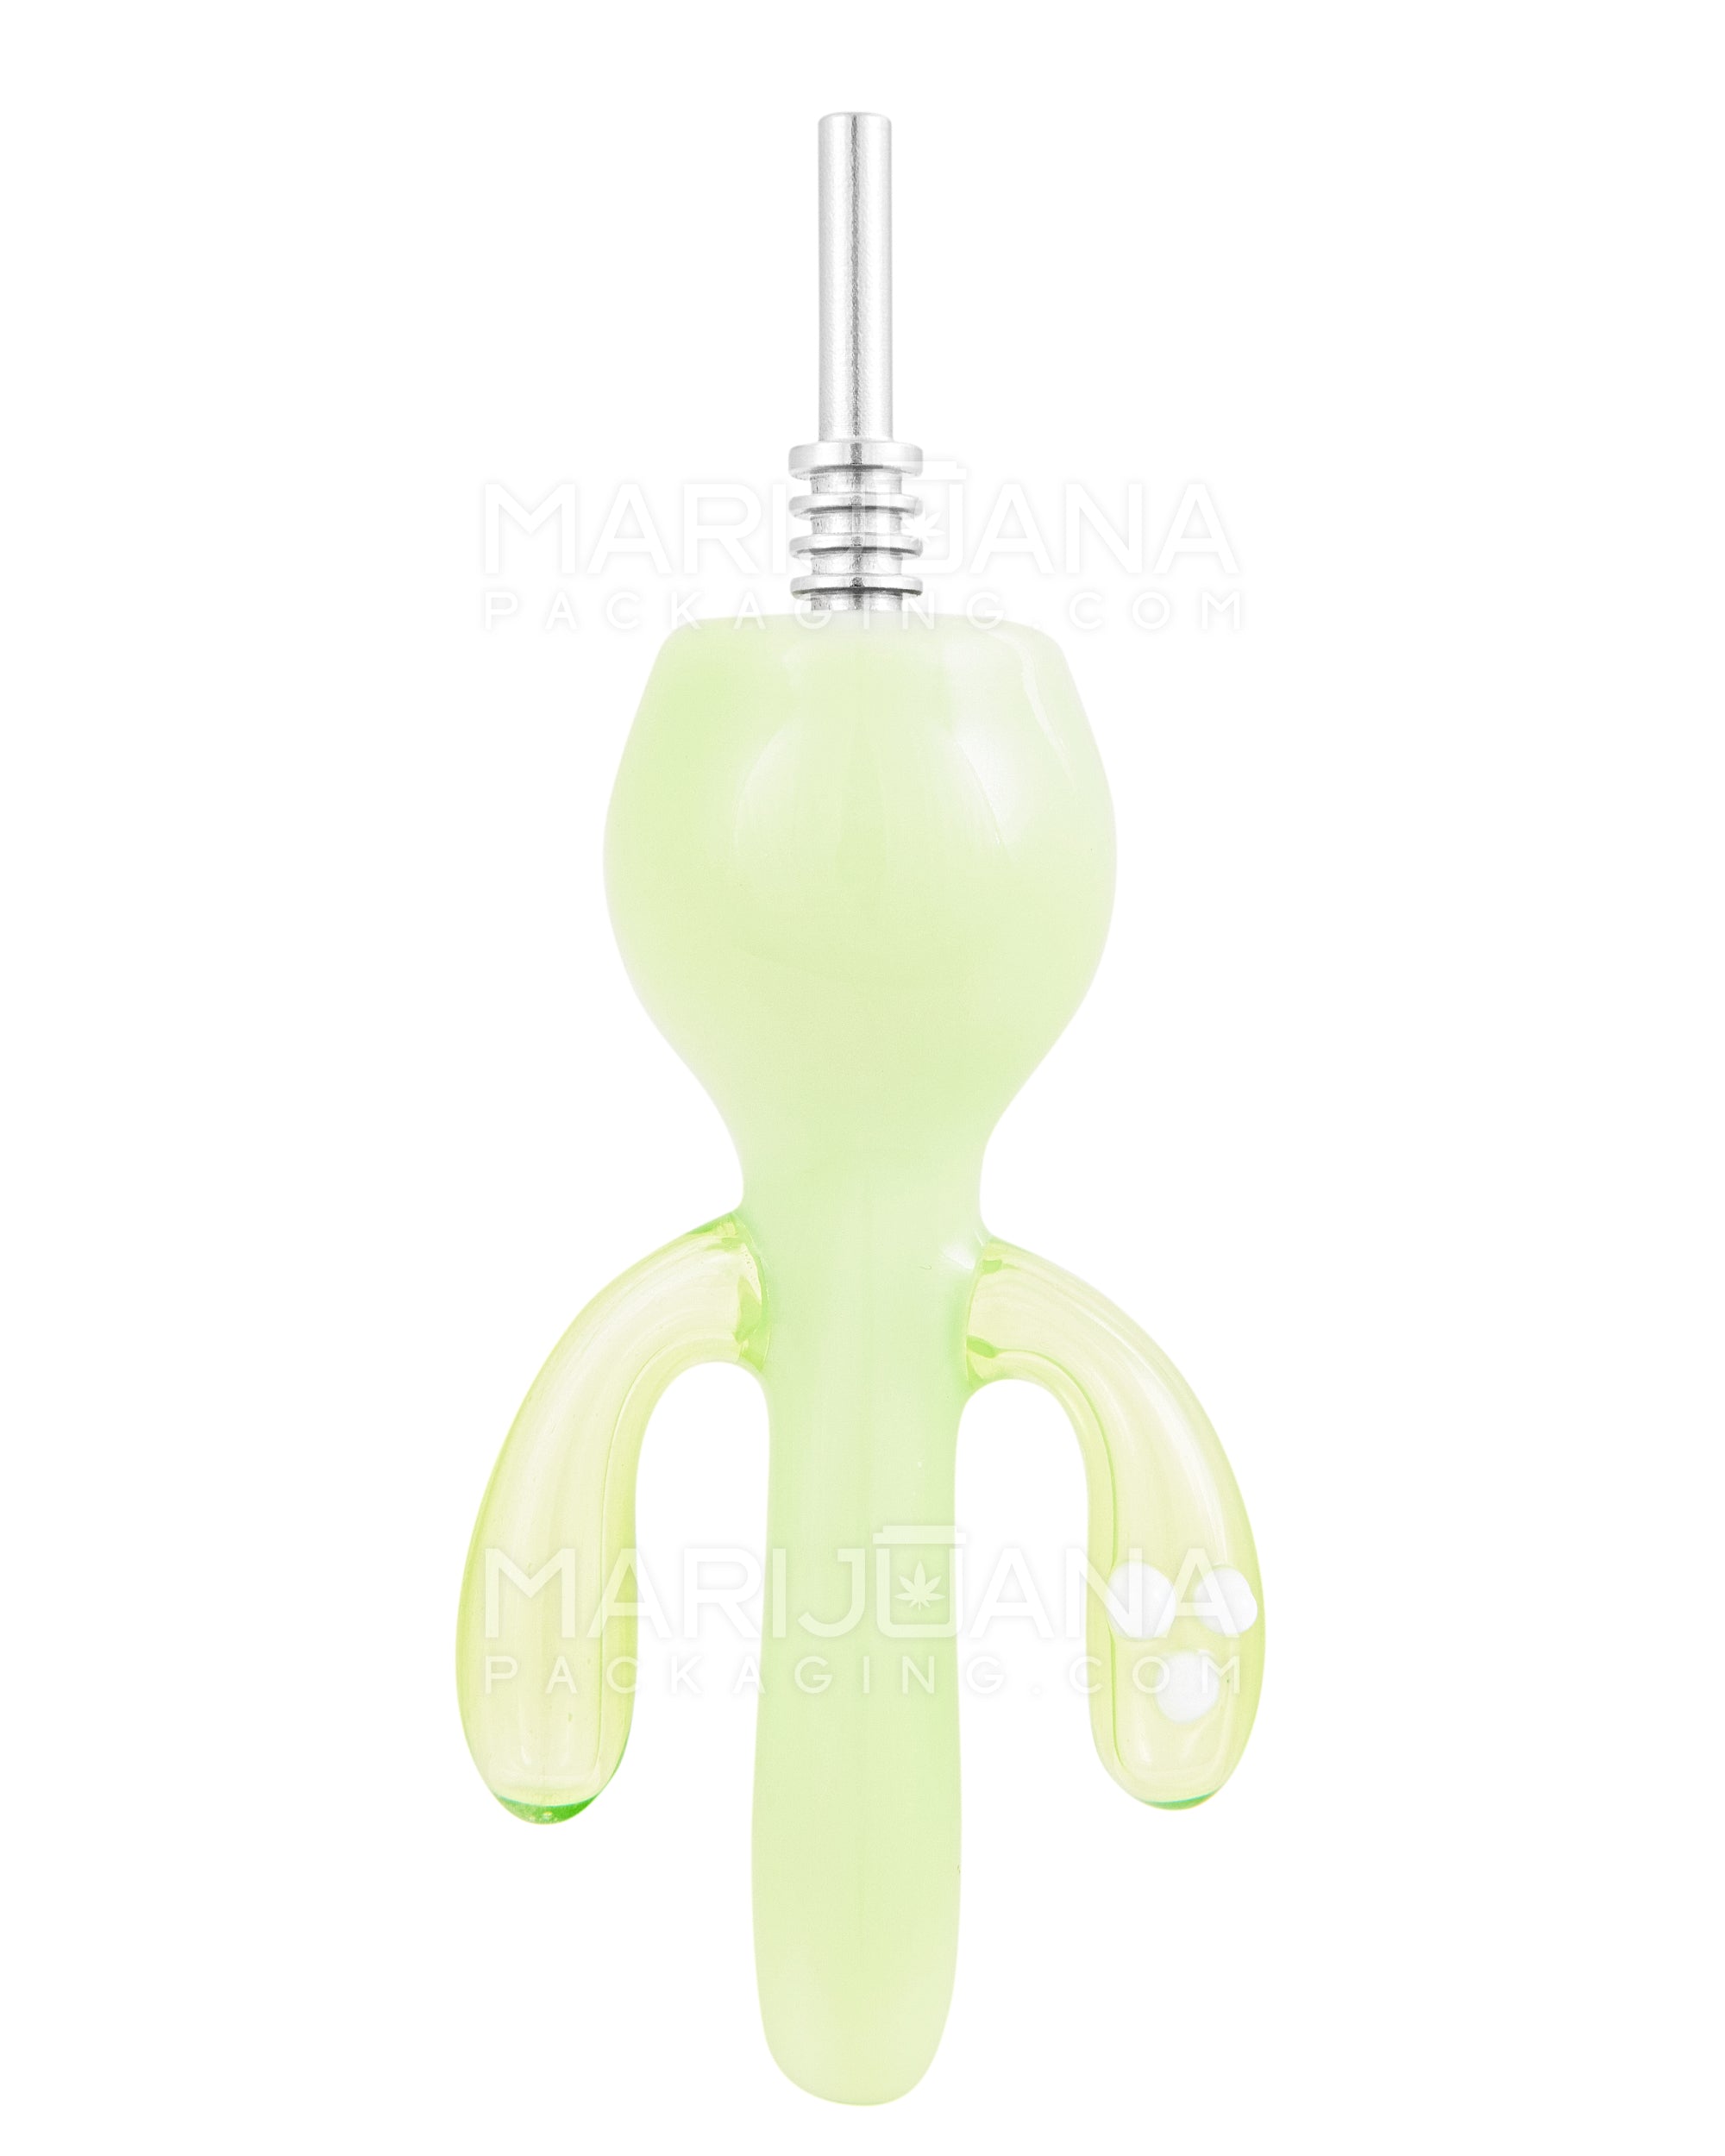 Cactus Nectar Collector Dab Pipe w/ Titanium Tip | 6in Long - 10mm Attachment - Green - 1